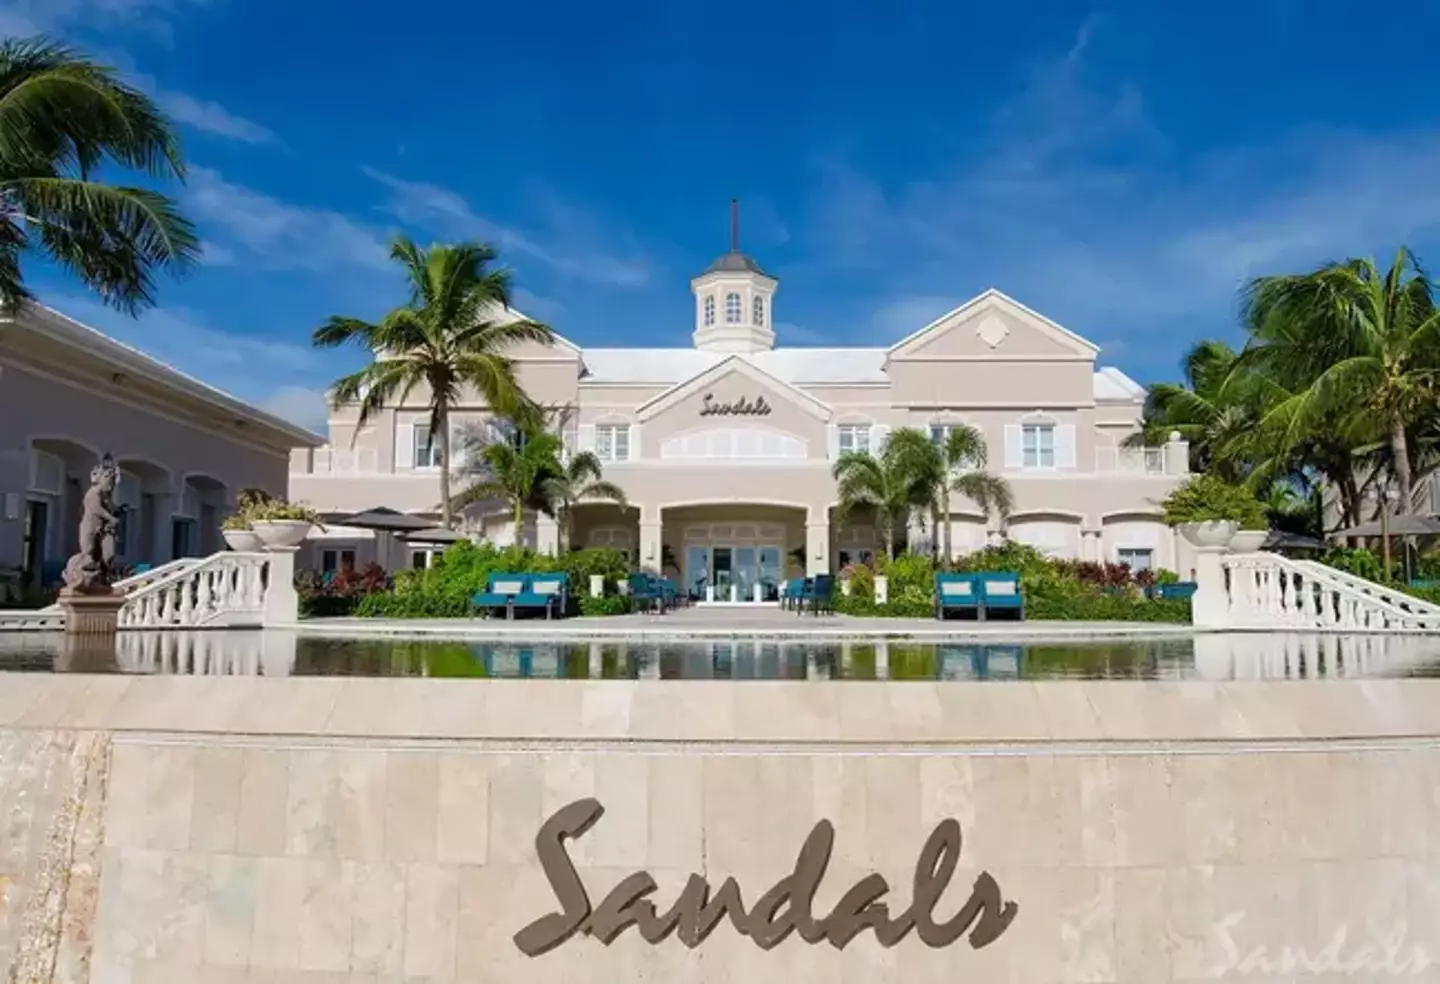 Three people were found dead at the popular resort in the Bahamas.